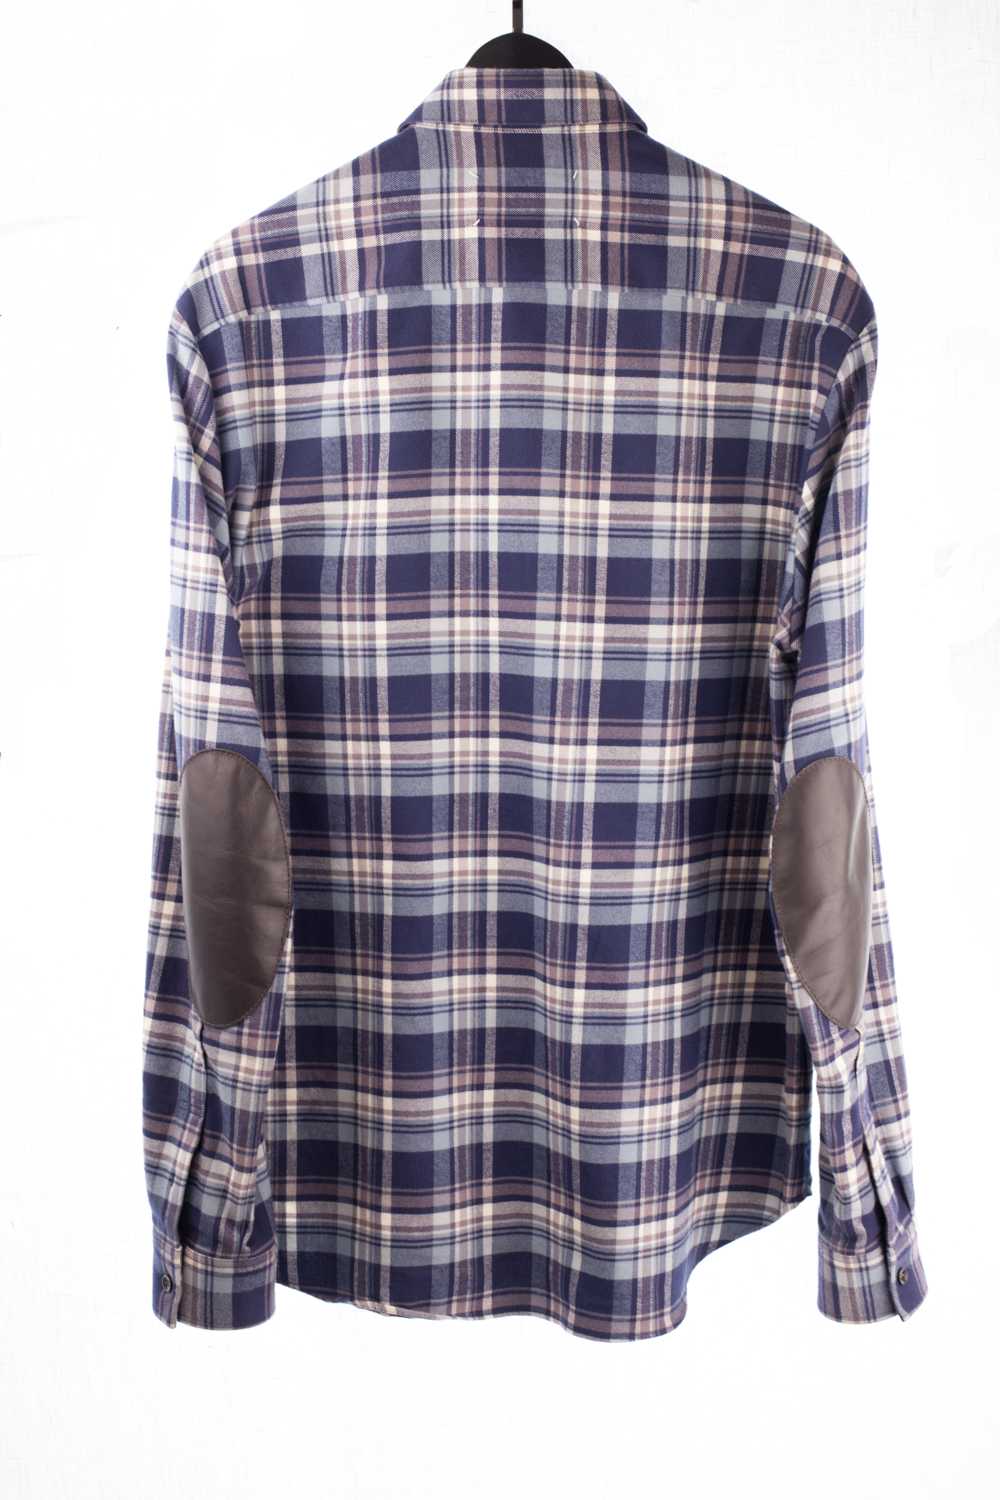 Line 10 Margiela Flannel with Elbow Pads - image 2